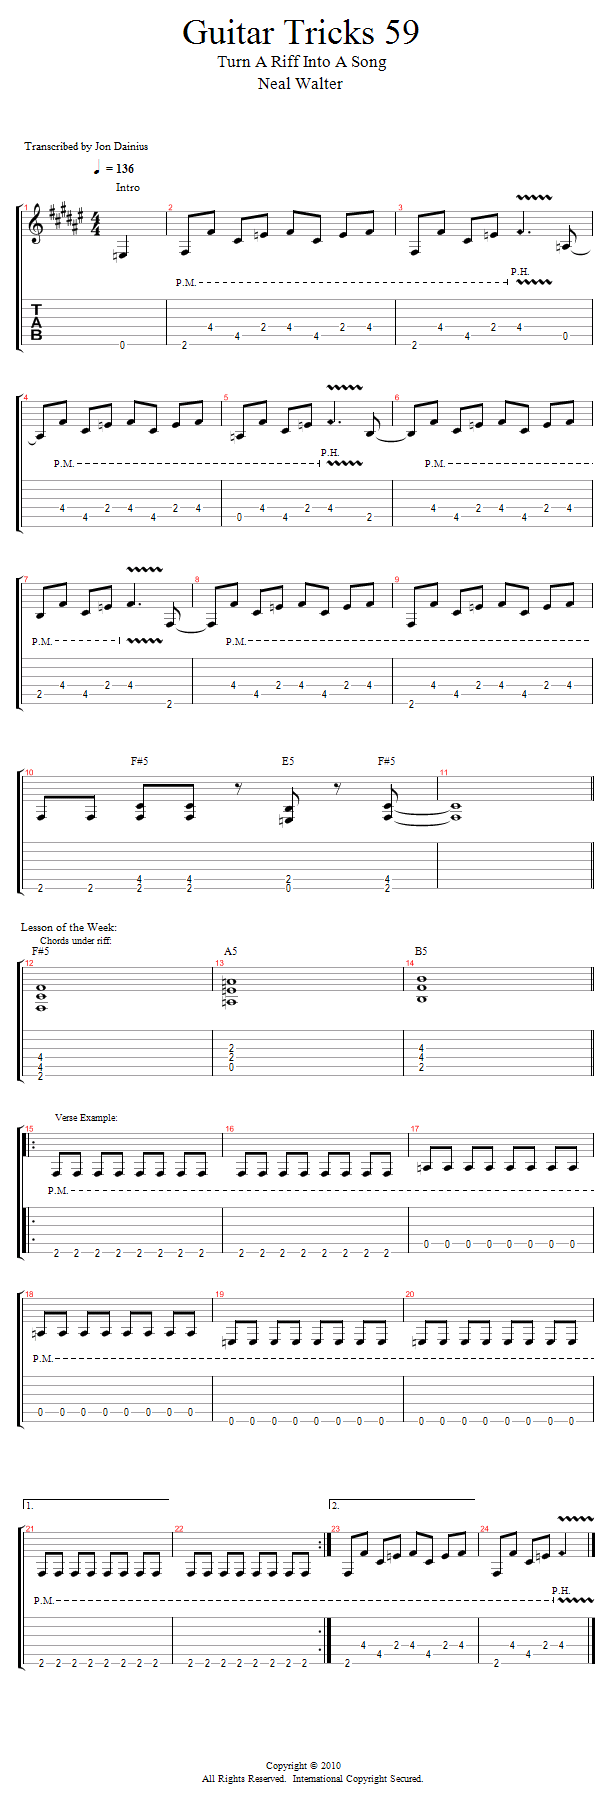 Guitar Tricks 59:Turn a Riff Into a Song song notation